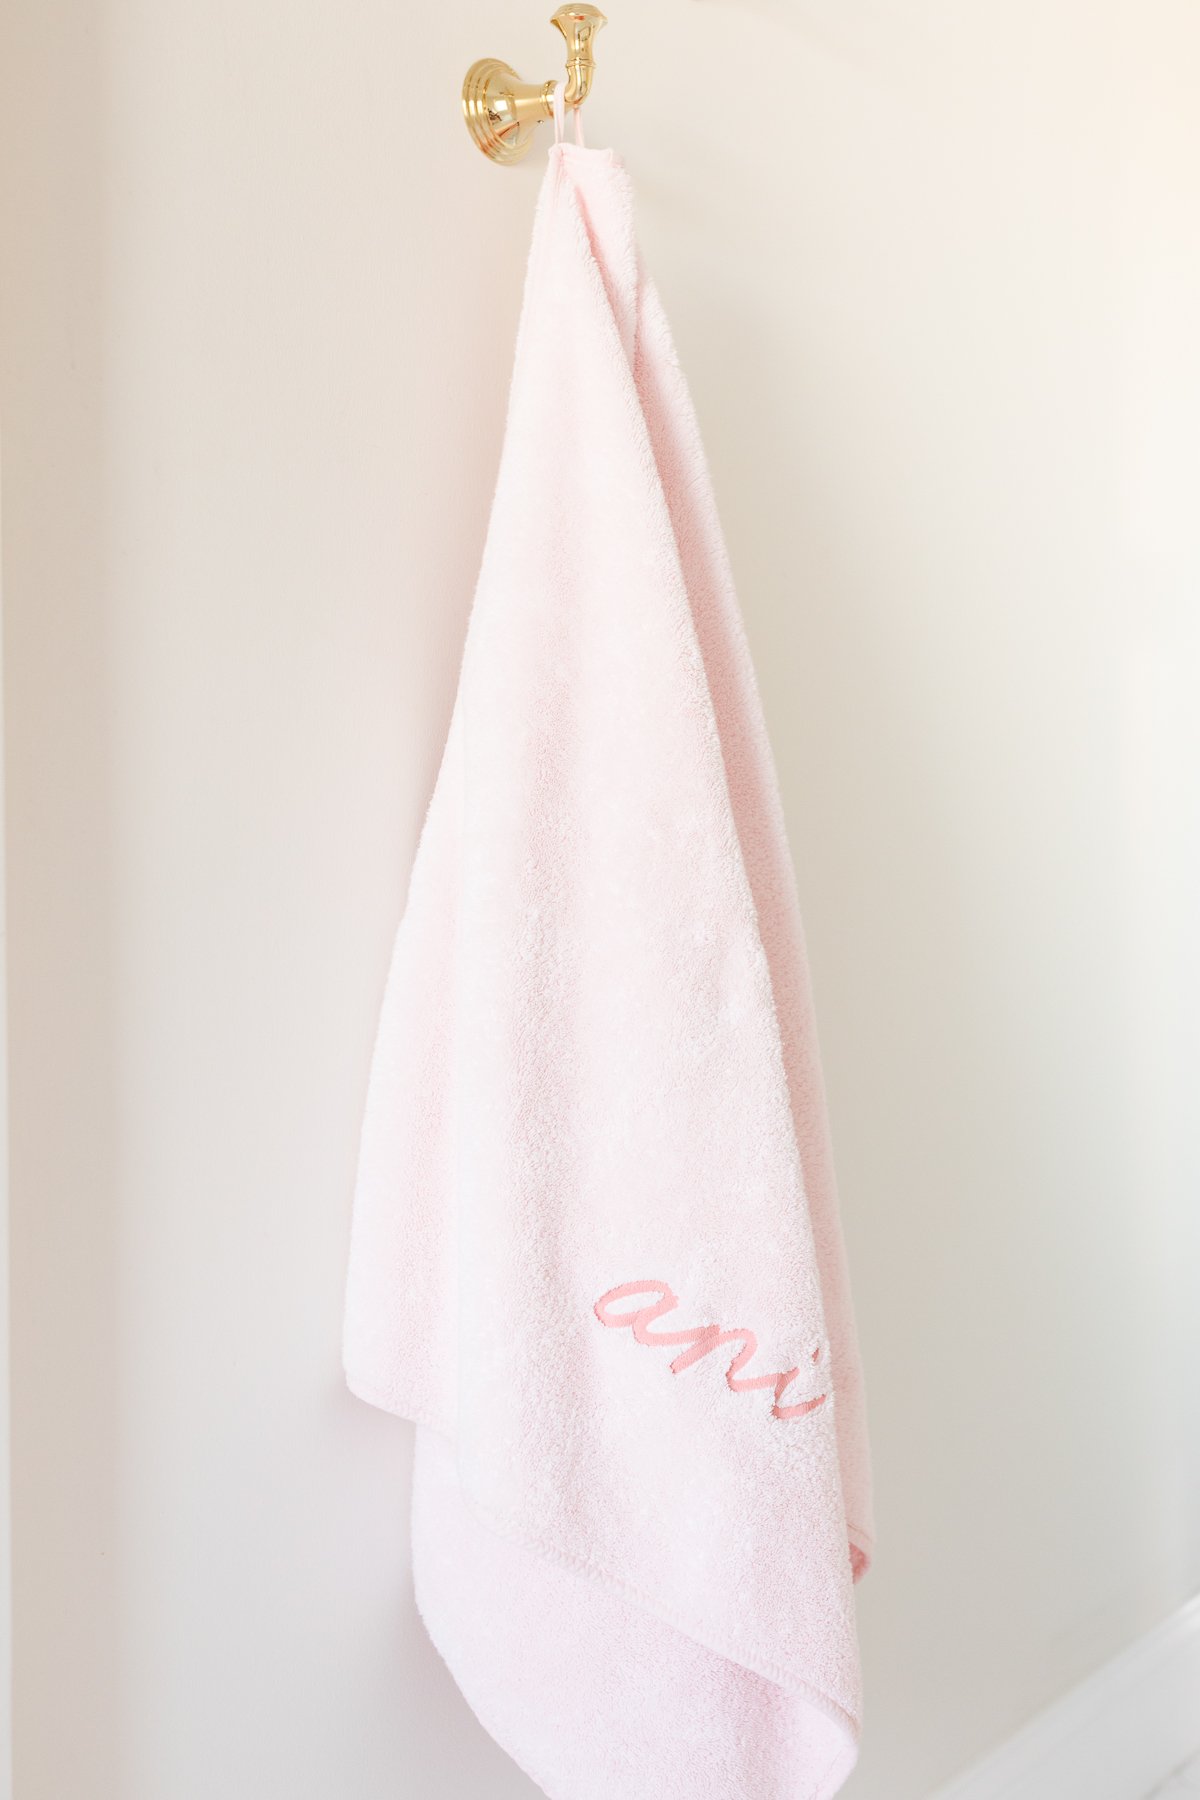 Pink towel hanging on a brass hook in a bathroom.